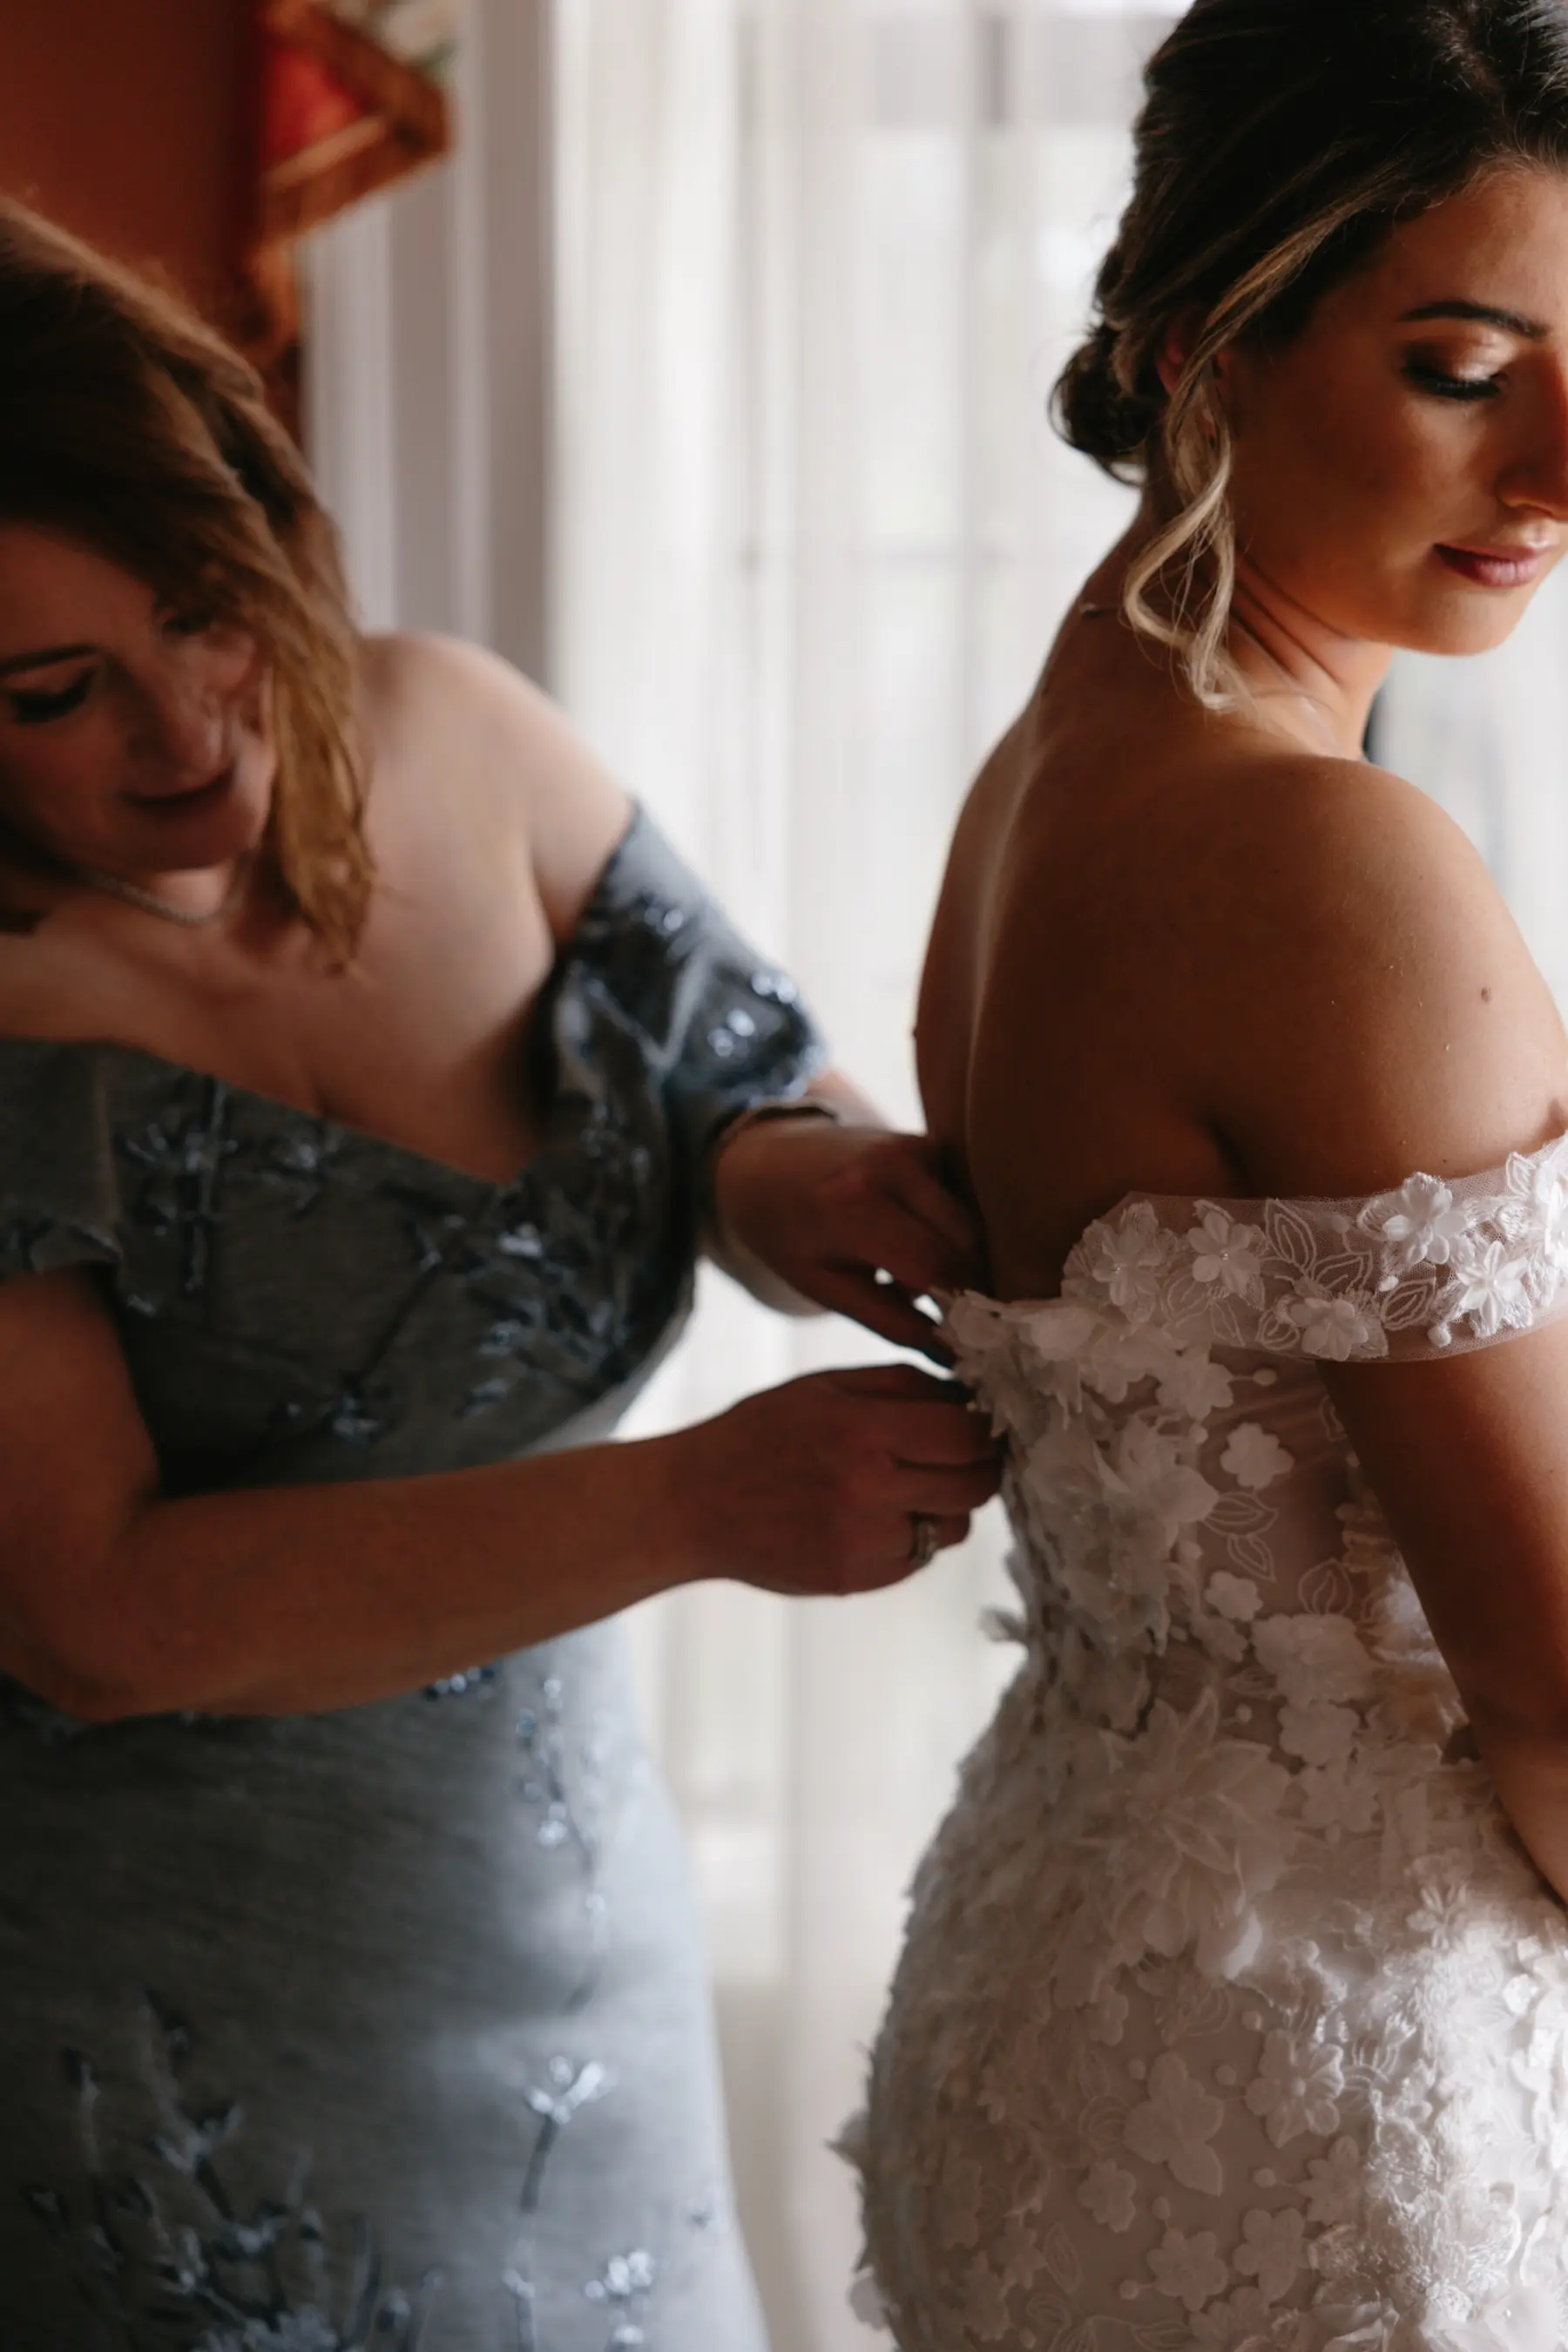 Bride and Mother Getting Ready Wedding Portrait | White Off The Shoulder Lace Fit and Flare Milla Nova Wedding Dress Ideas | Classic Bridal Updo Inspiration | Sarasota Hair and Makeup Artist Femme Akoi Beauty Studio